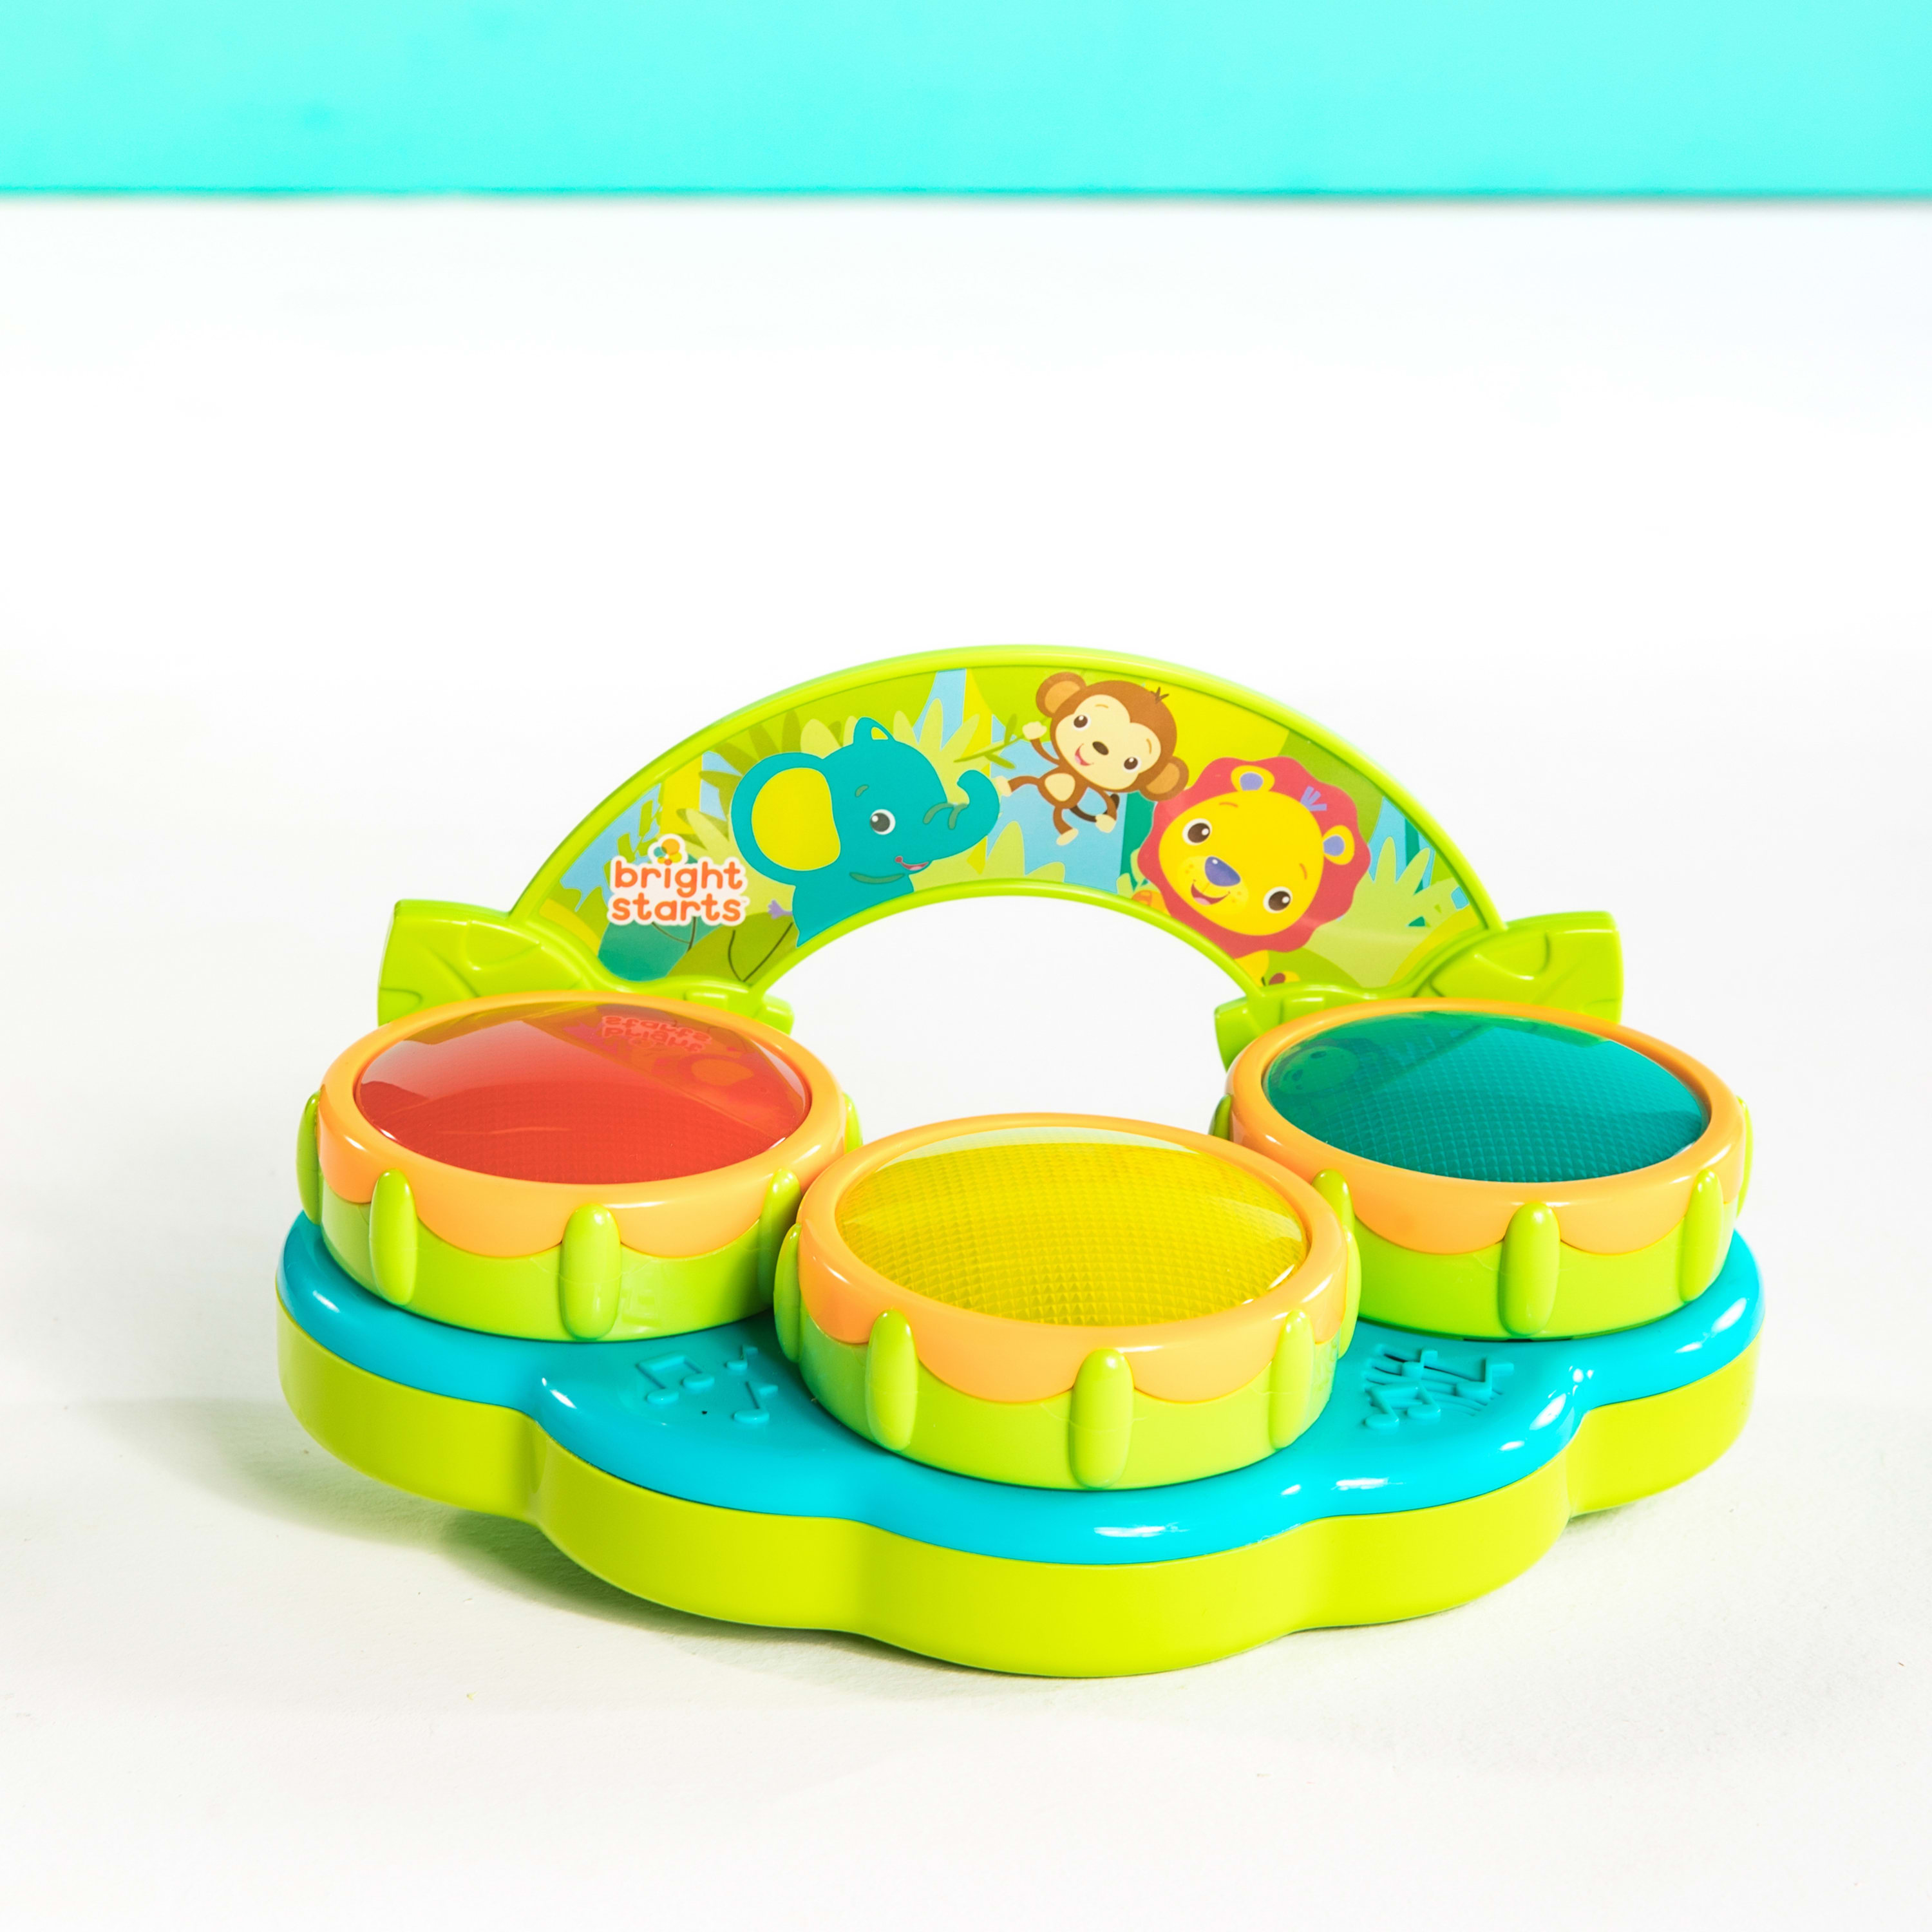 Bright Starts Safari Beats Musical Drum Toy with Lights, Ages 3 Months +, Infant and Toddler, Unisex - image 5 of 7